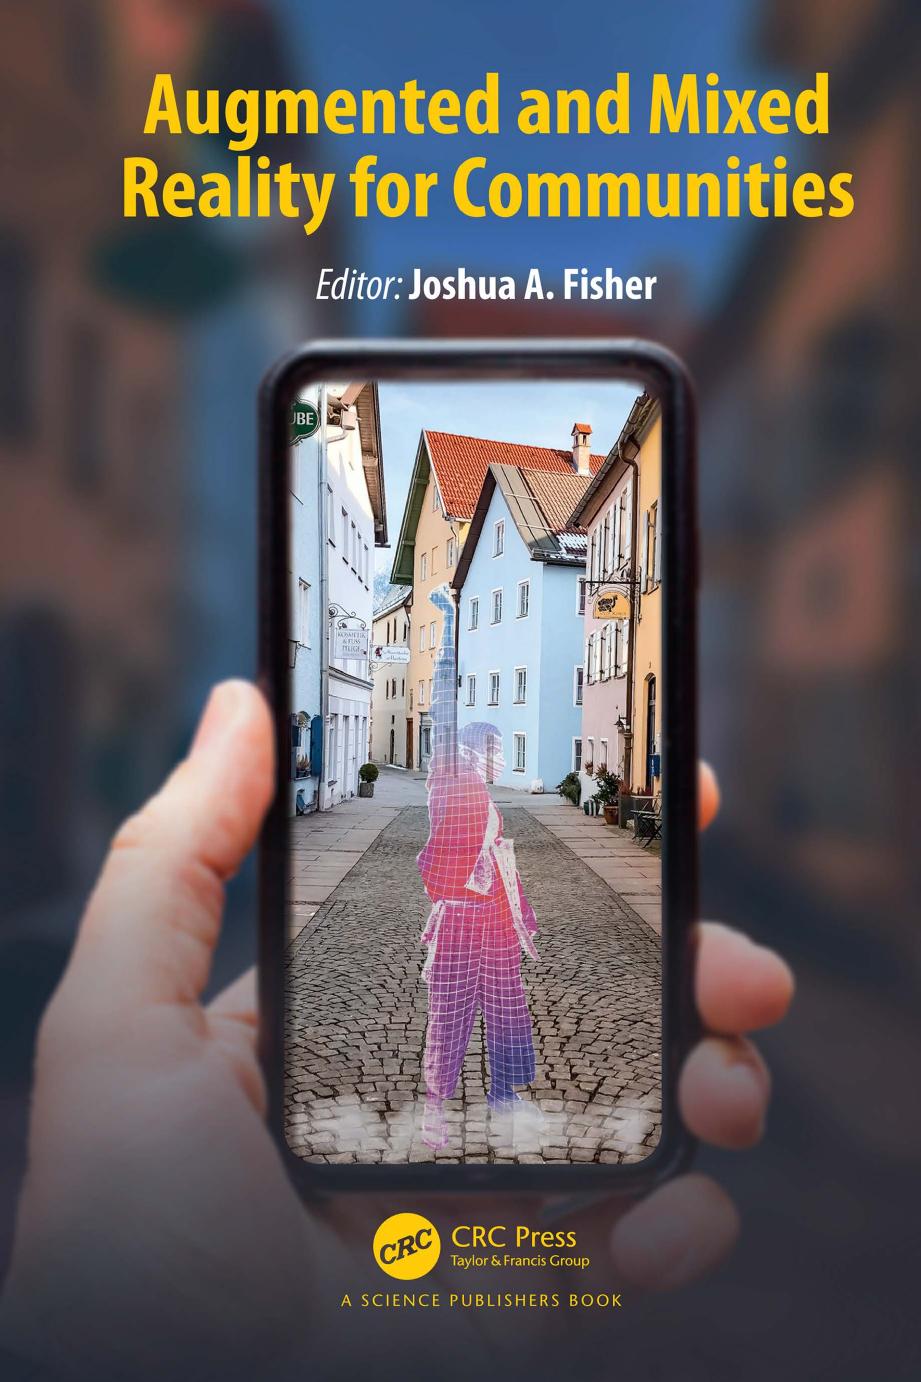 Augmented and Mixed Reality for Communities by Joshua A. Fisher (editor)